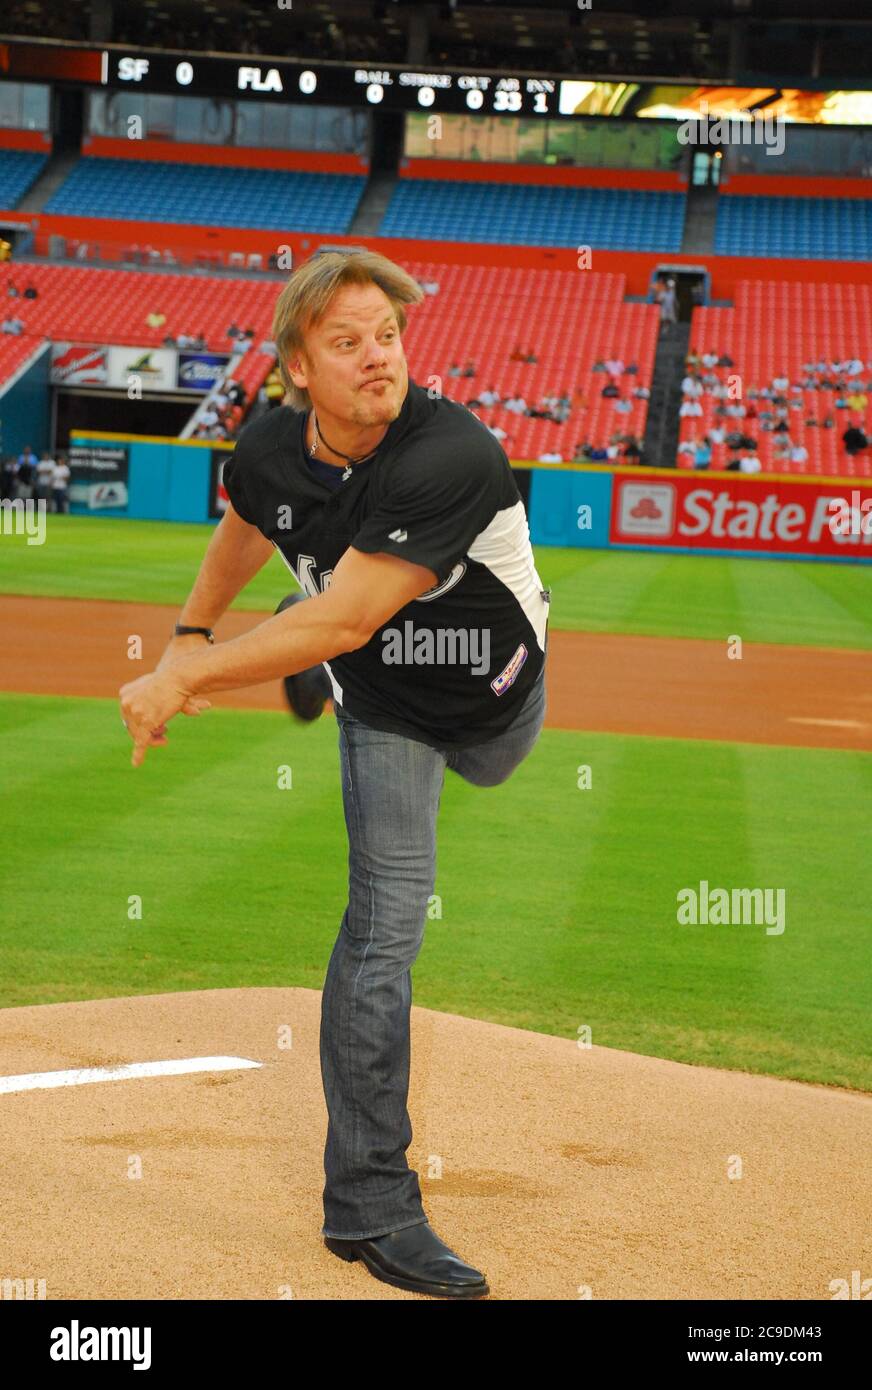 Miami, United States Of America. 06th June, 2009. MIAMI, FL - June 6: Country music super, Phil Vassar star throws out the first pitch before at a Florida Marlins home game at Dolphin Stadium on June 6, 2009 in Miami, Florida People; Phil Vassar Credit: Storms Media Group/Alamy Live News Stock Photo